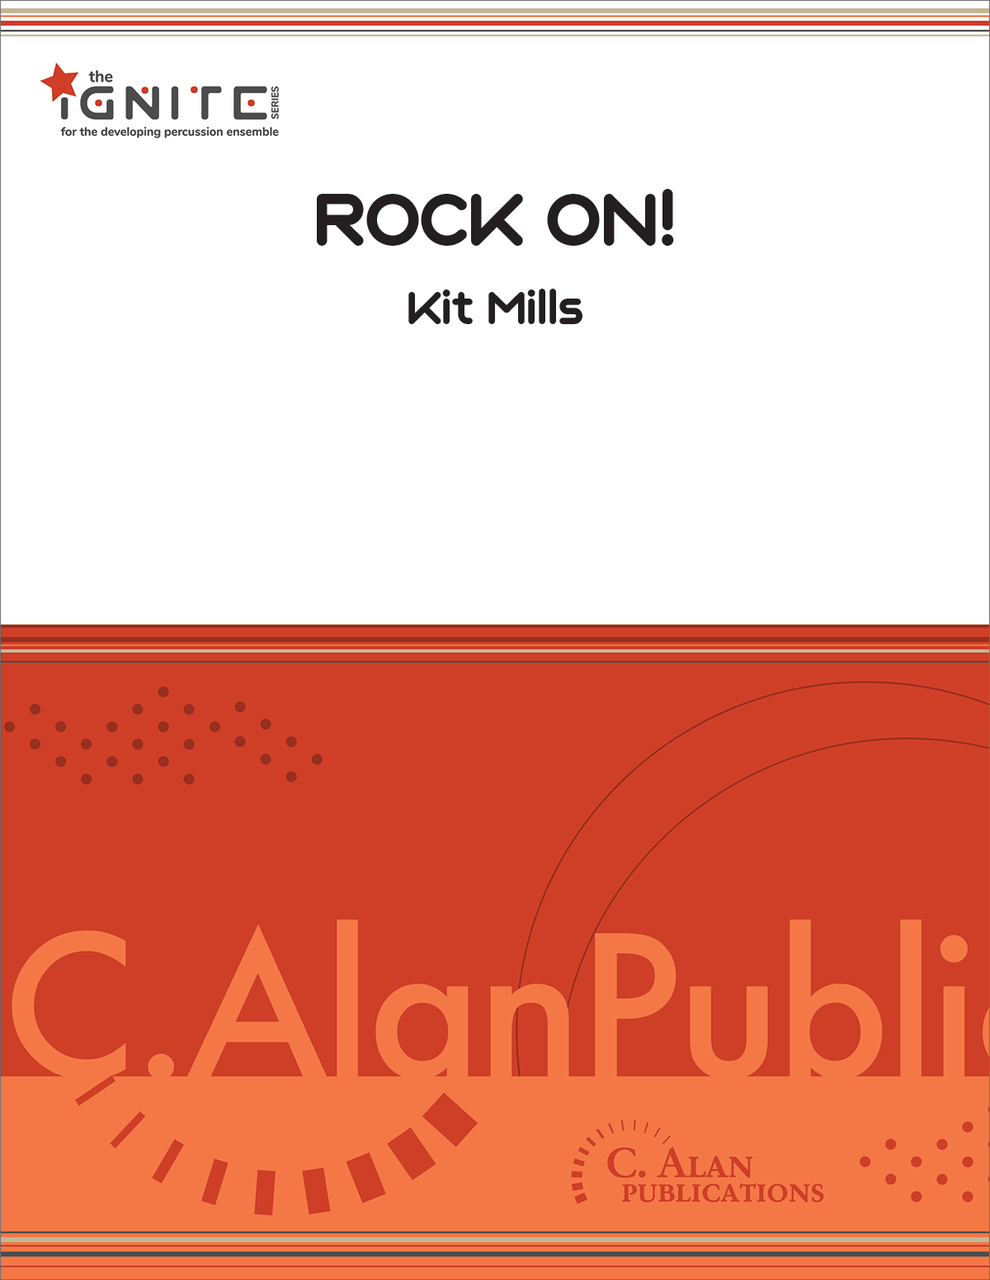 Rock On! by Kit Mills